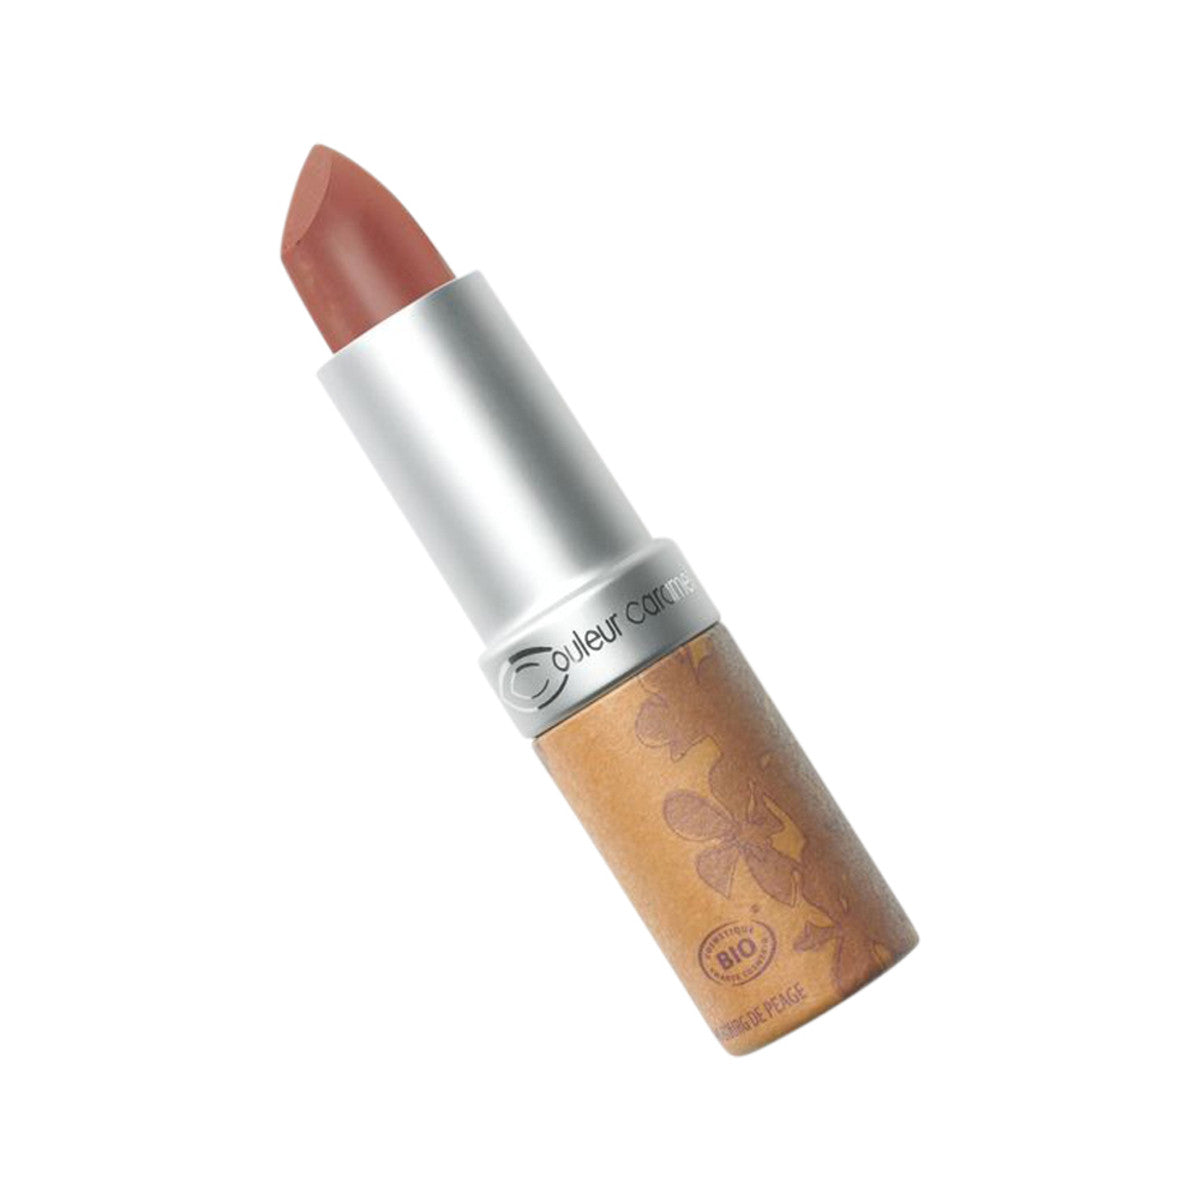 Couleur Caramel - Lipstck Glossy Pearly Chocolate Brown (211)